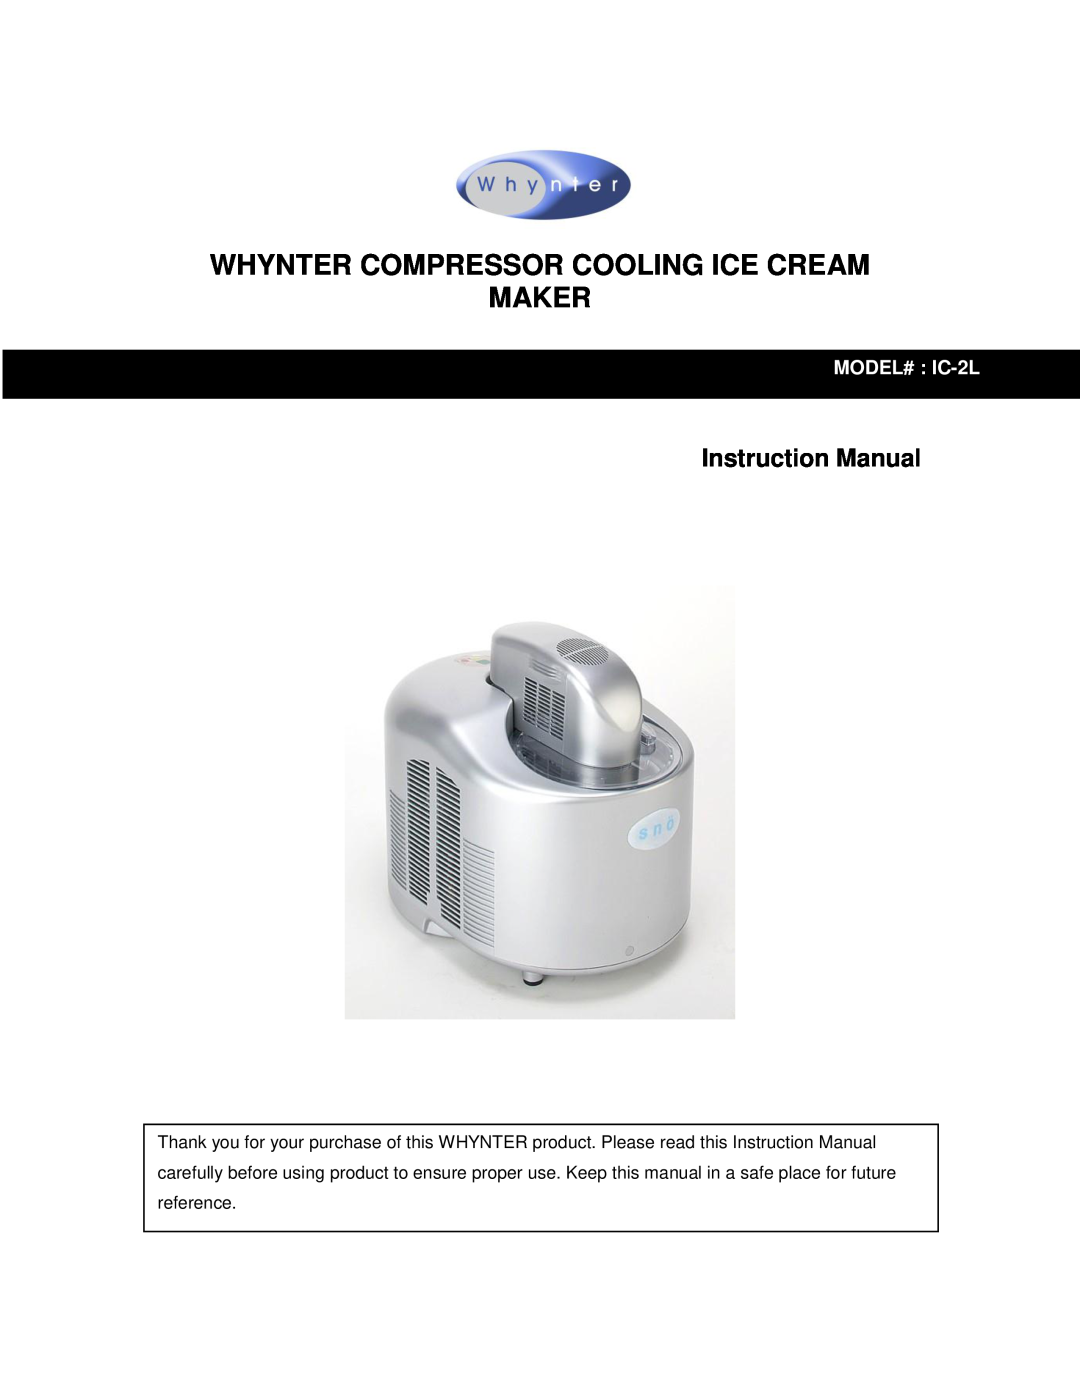 Whynter instruction manual WHYNTER SNO Professional Ice Cream Maker, IC-2L06/07 